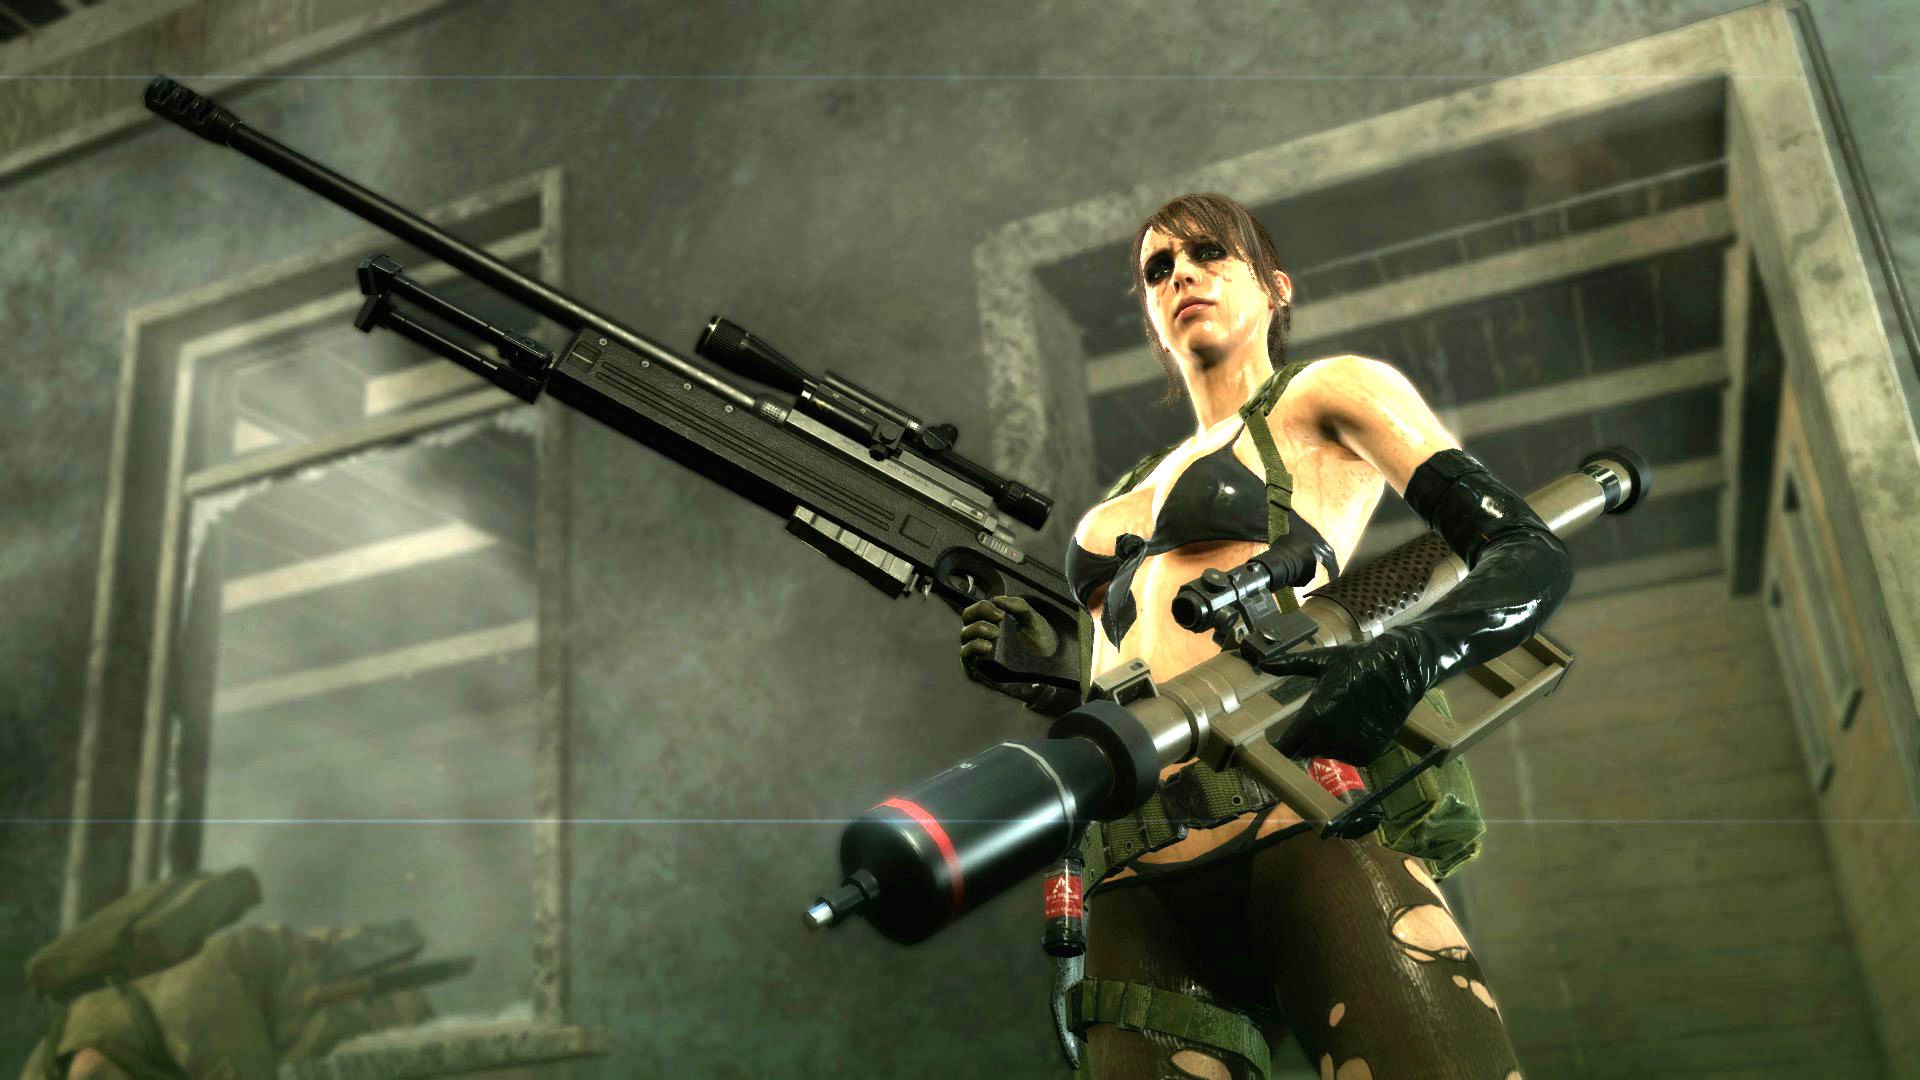 metal, Gear, Solid, Tactical, Shooter, Action, Fighting, Warrior, Military Wallpaper